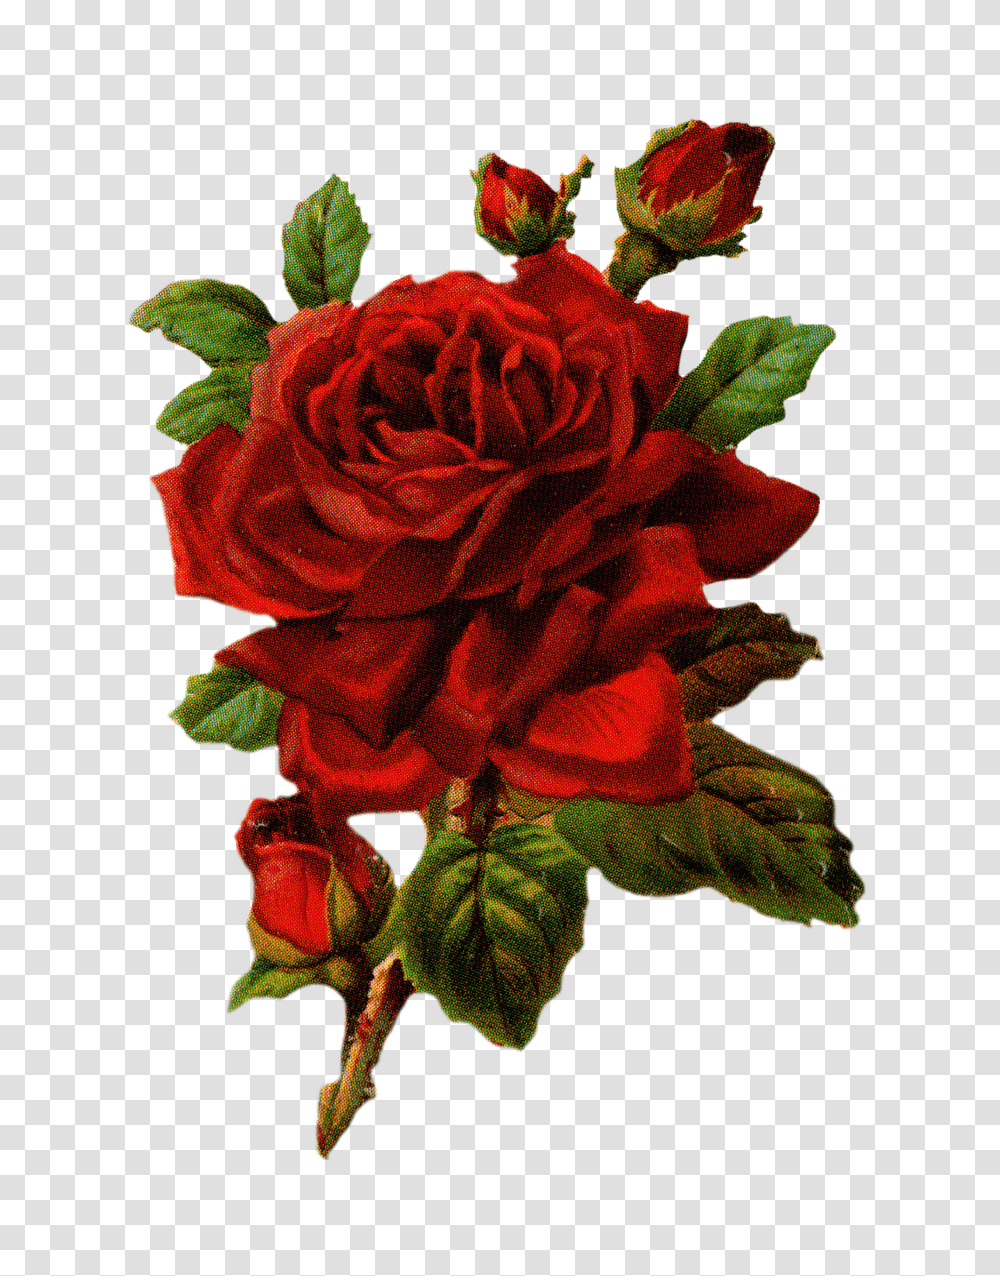 Royalty Free Large Red Rose Graphic Transparent Png